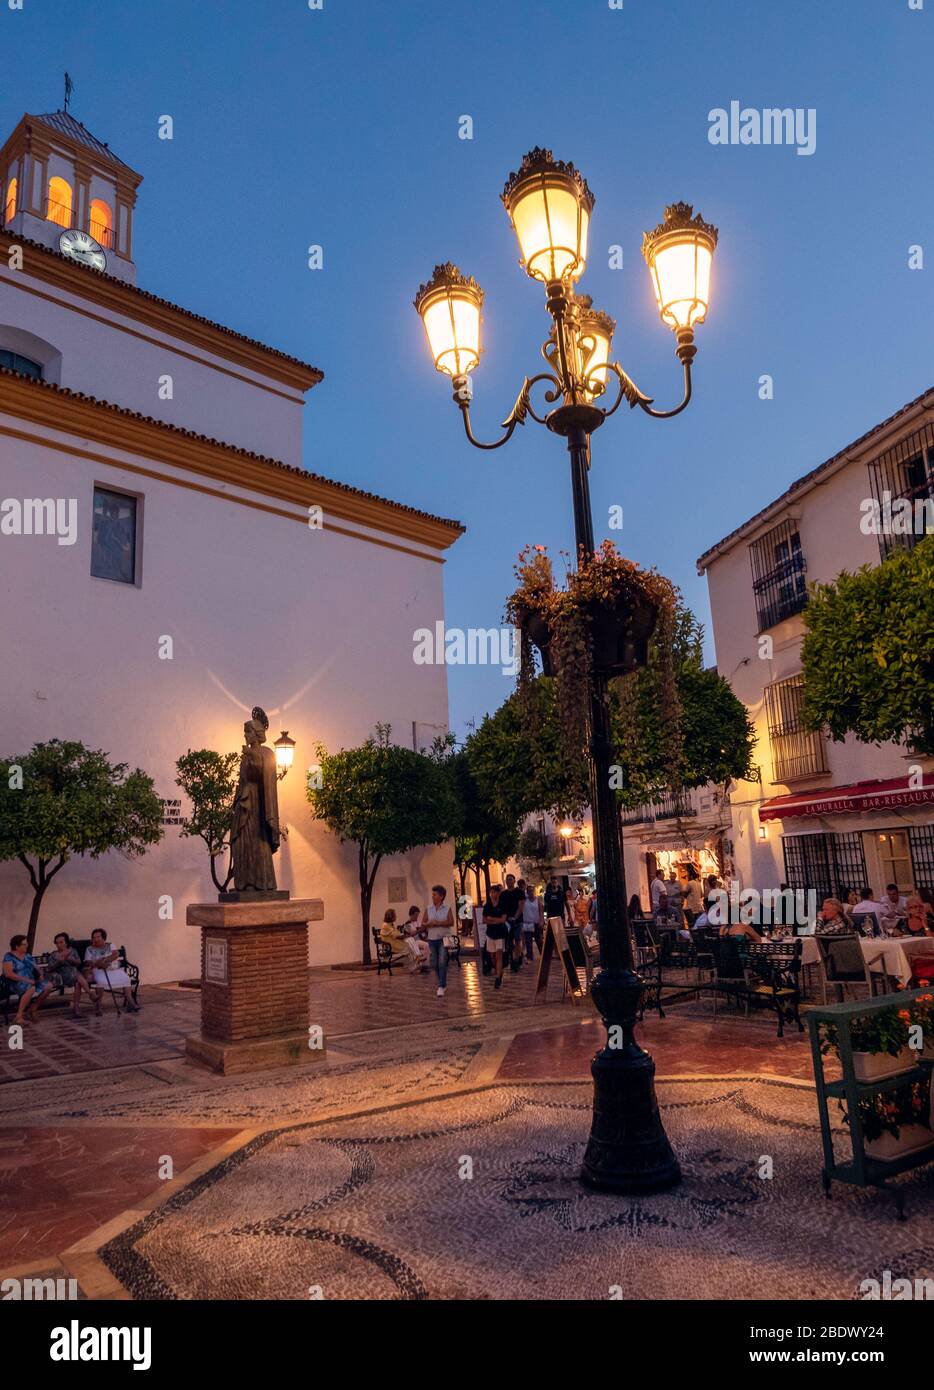 People eating in a cobbled square in Marbella old town, Marbella, Spain. Stock Photo